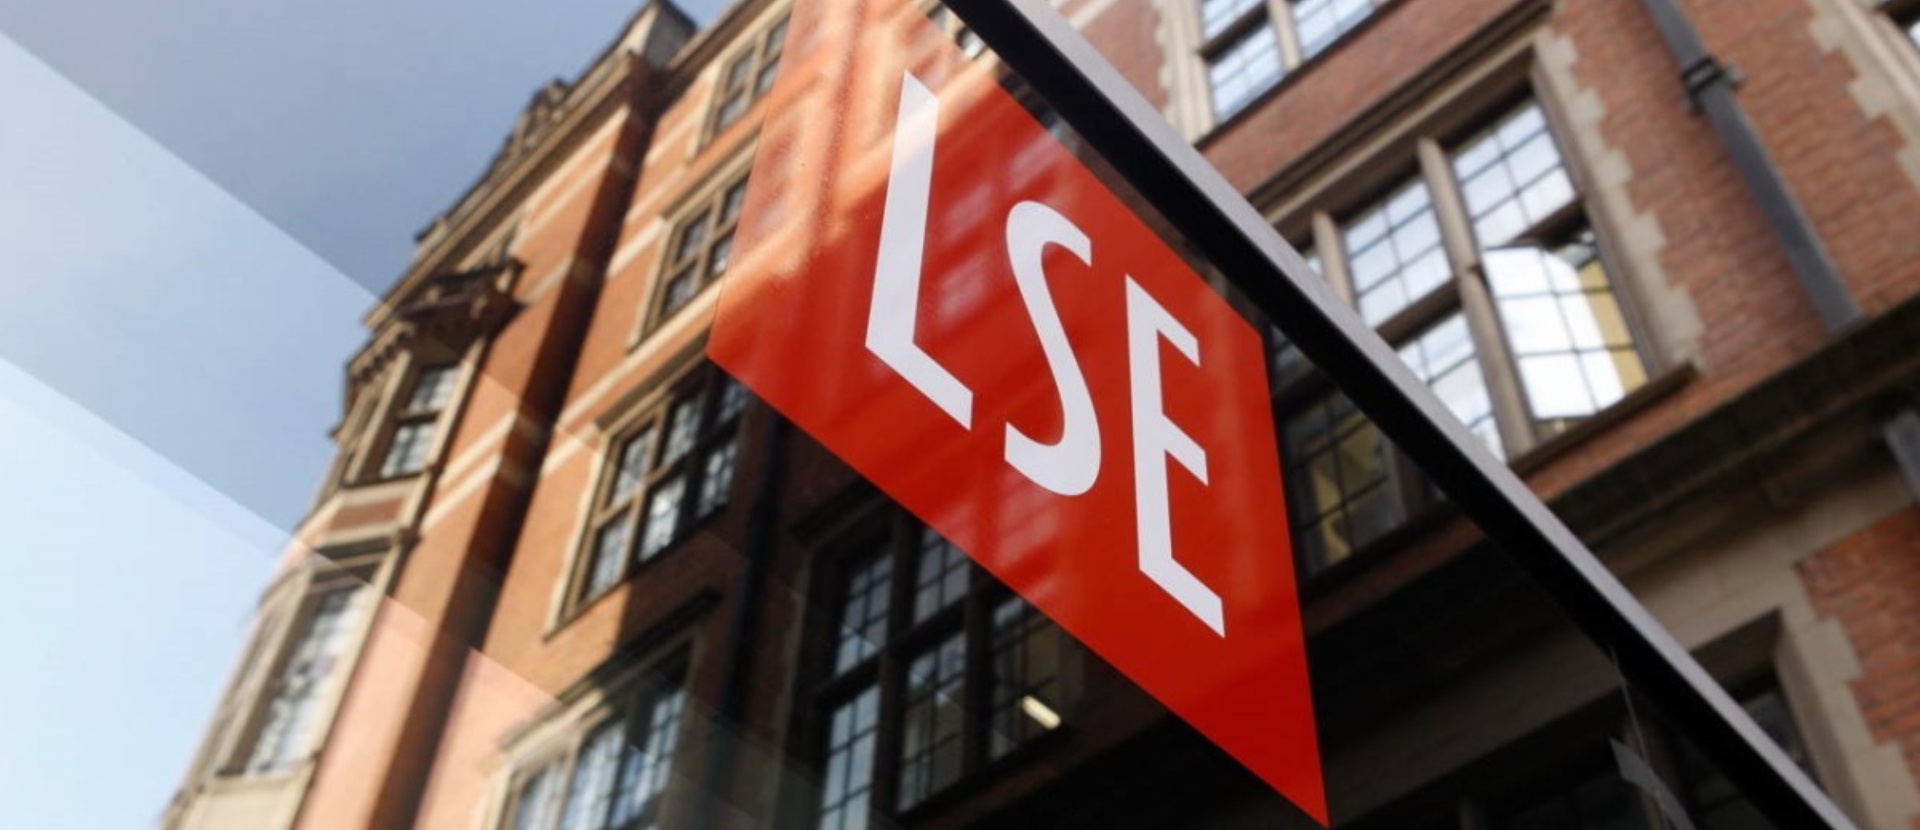 LSE-logo-and-signage-on-building-1920x830